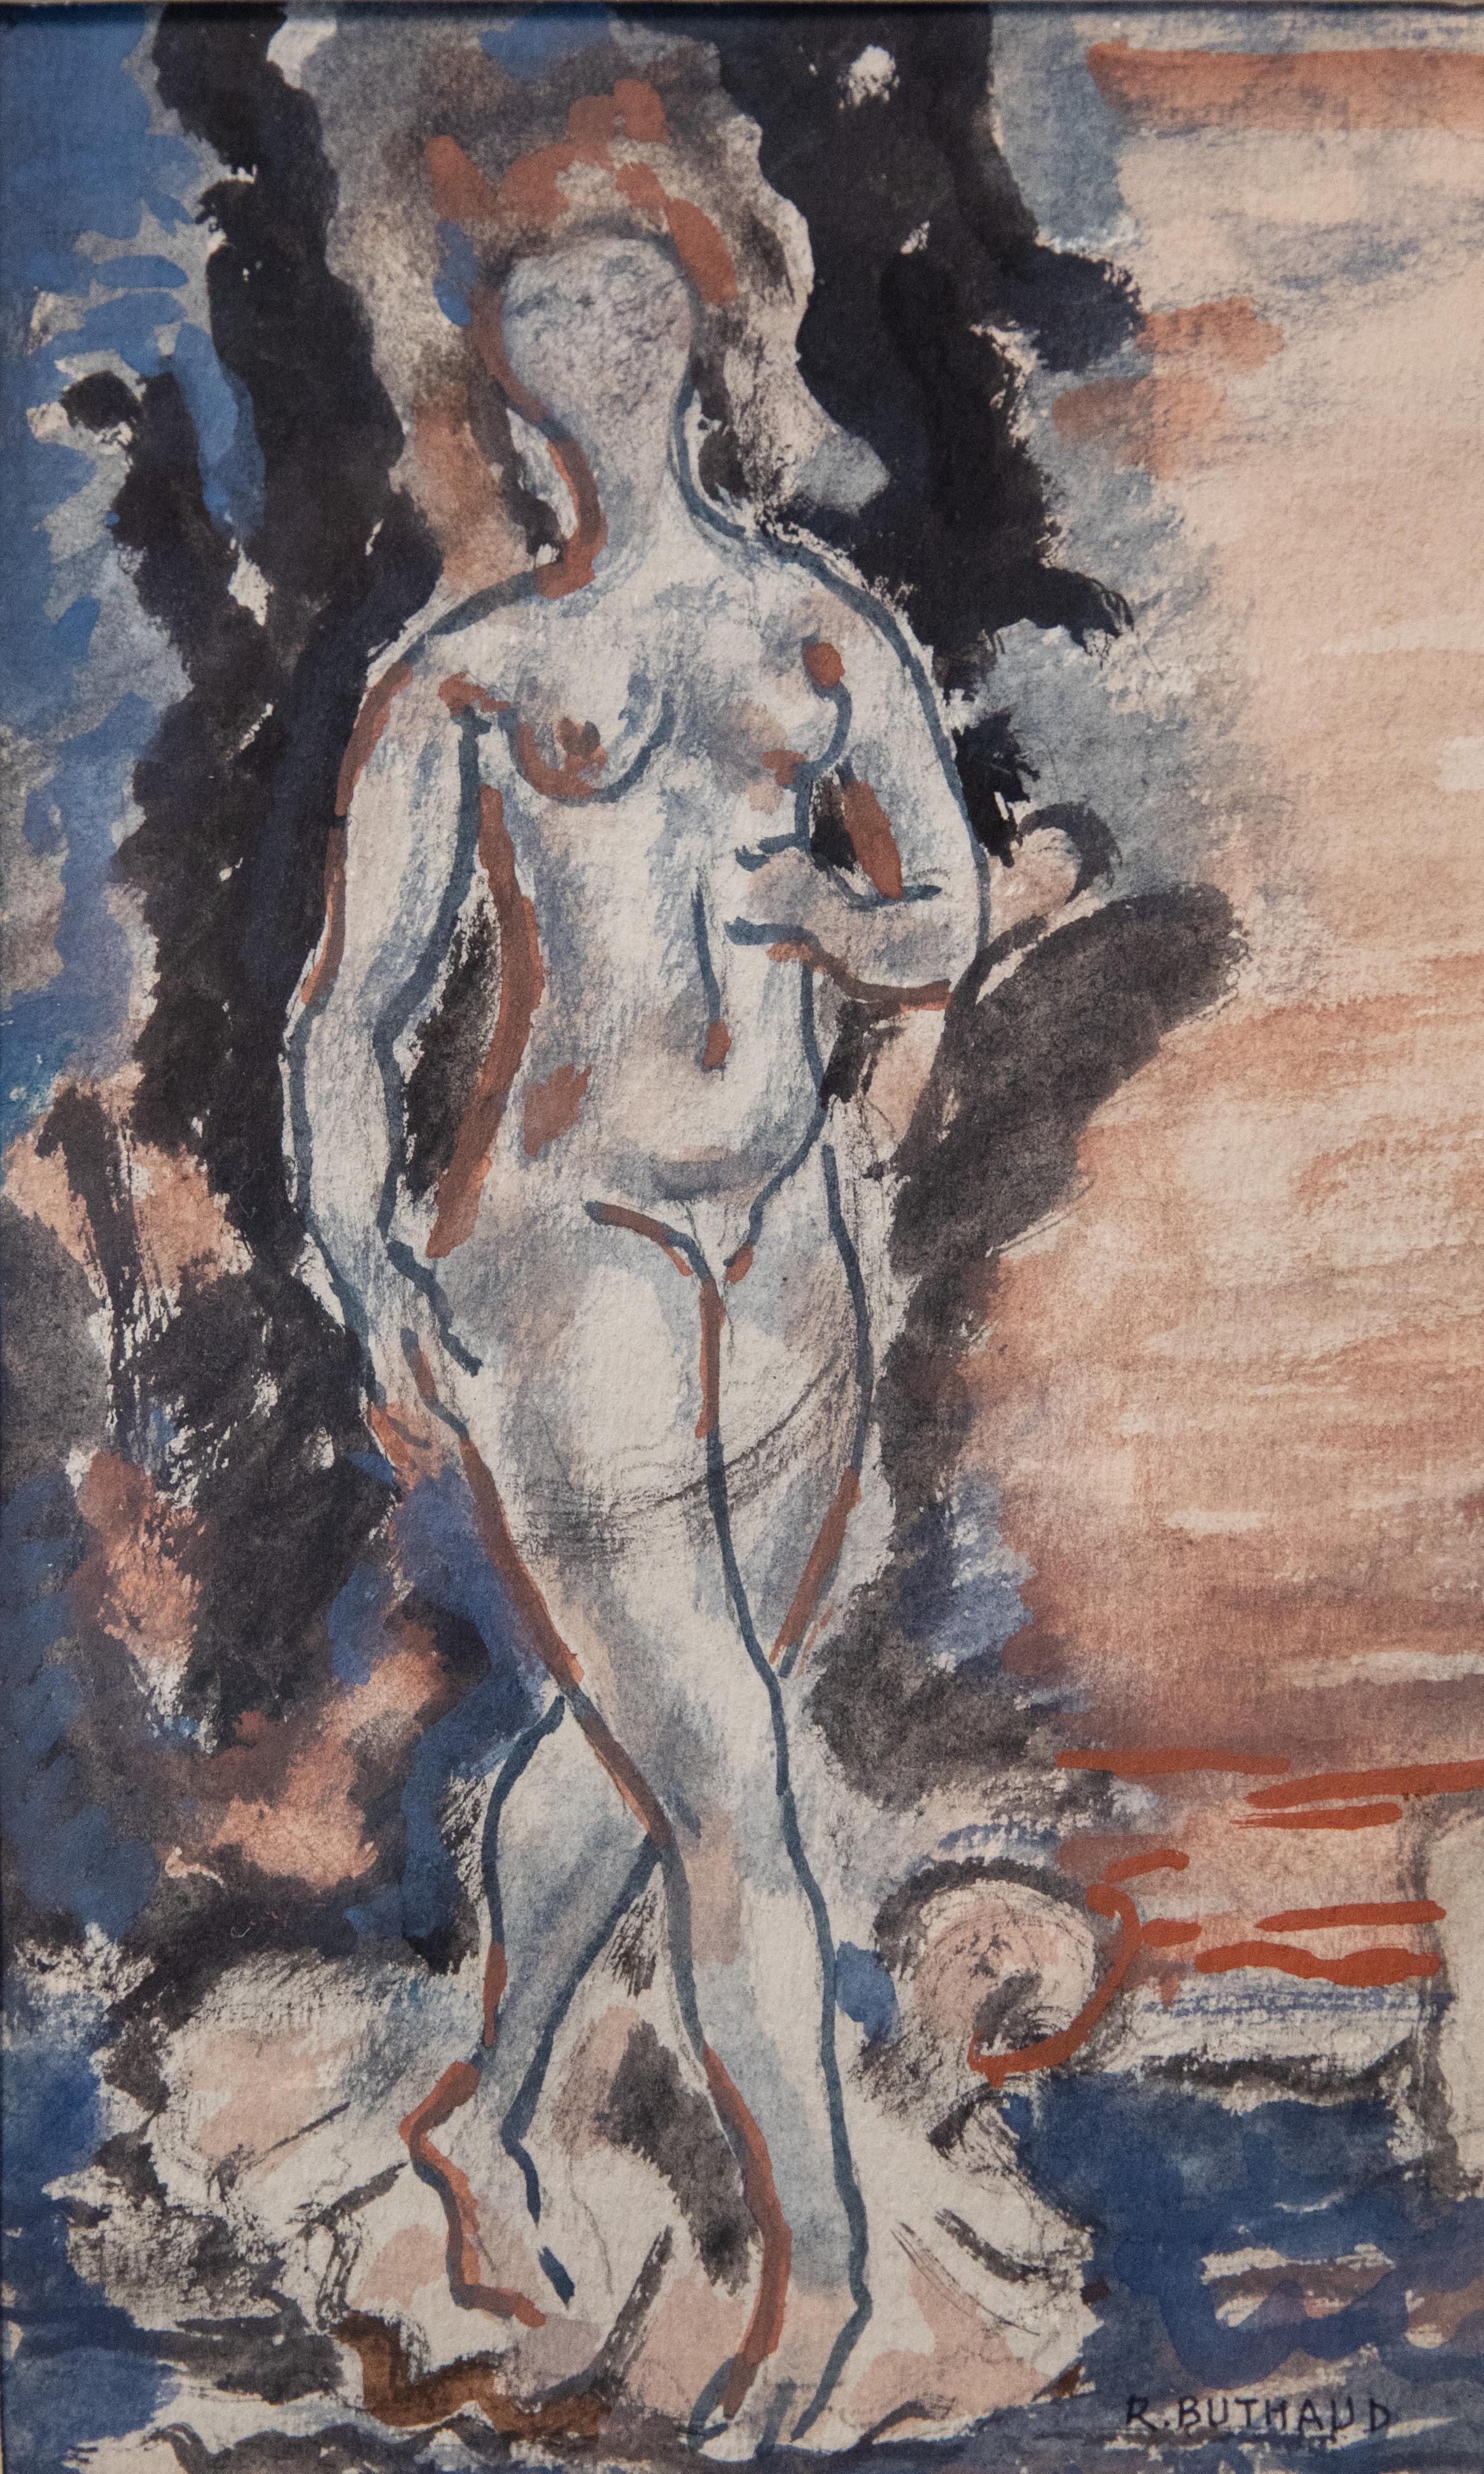 René Buthaud midcentury nude study, signed gouache on paper. Provenance: The artist, collection Michel Fortin, Paris: Collection of Stephen Engel, Florida: Literature: Cruège, René Buthaud. René Buthaud was seen as the most accomplished and